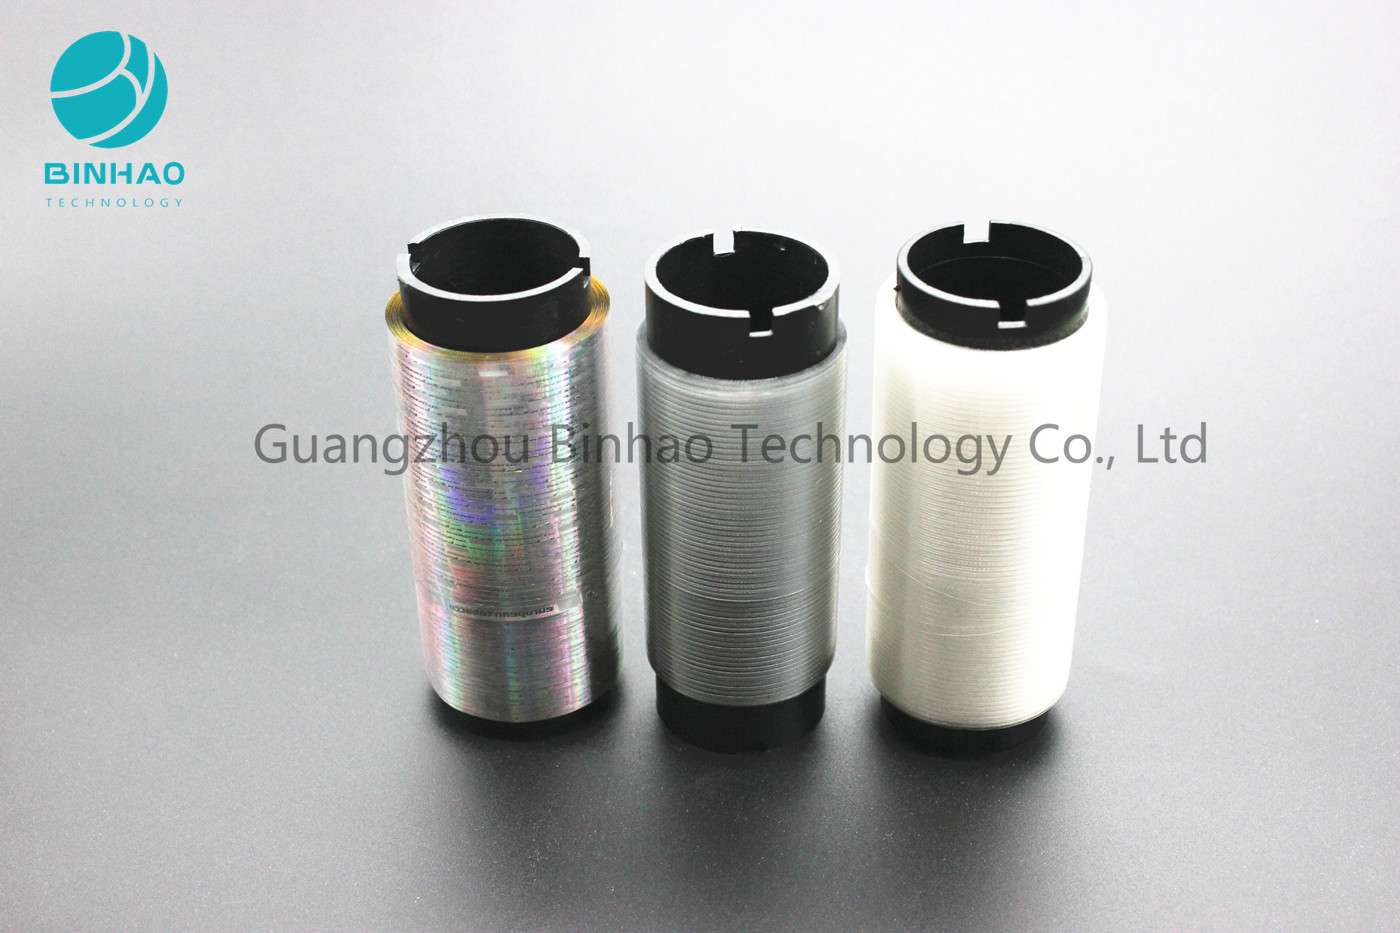 Tobacco Packaging Easy Tear Strip Tape Anti - Counterfeiting Laser Printing